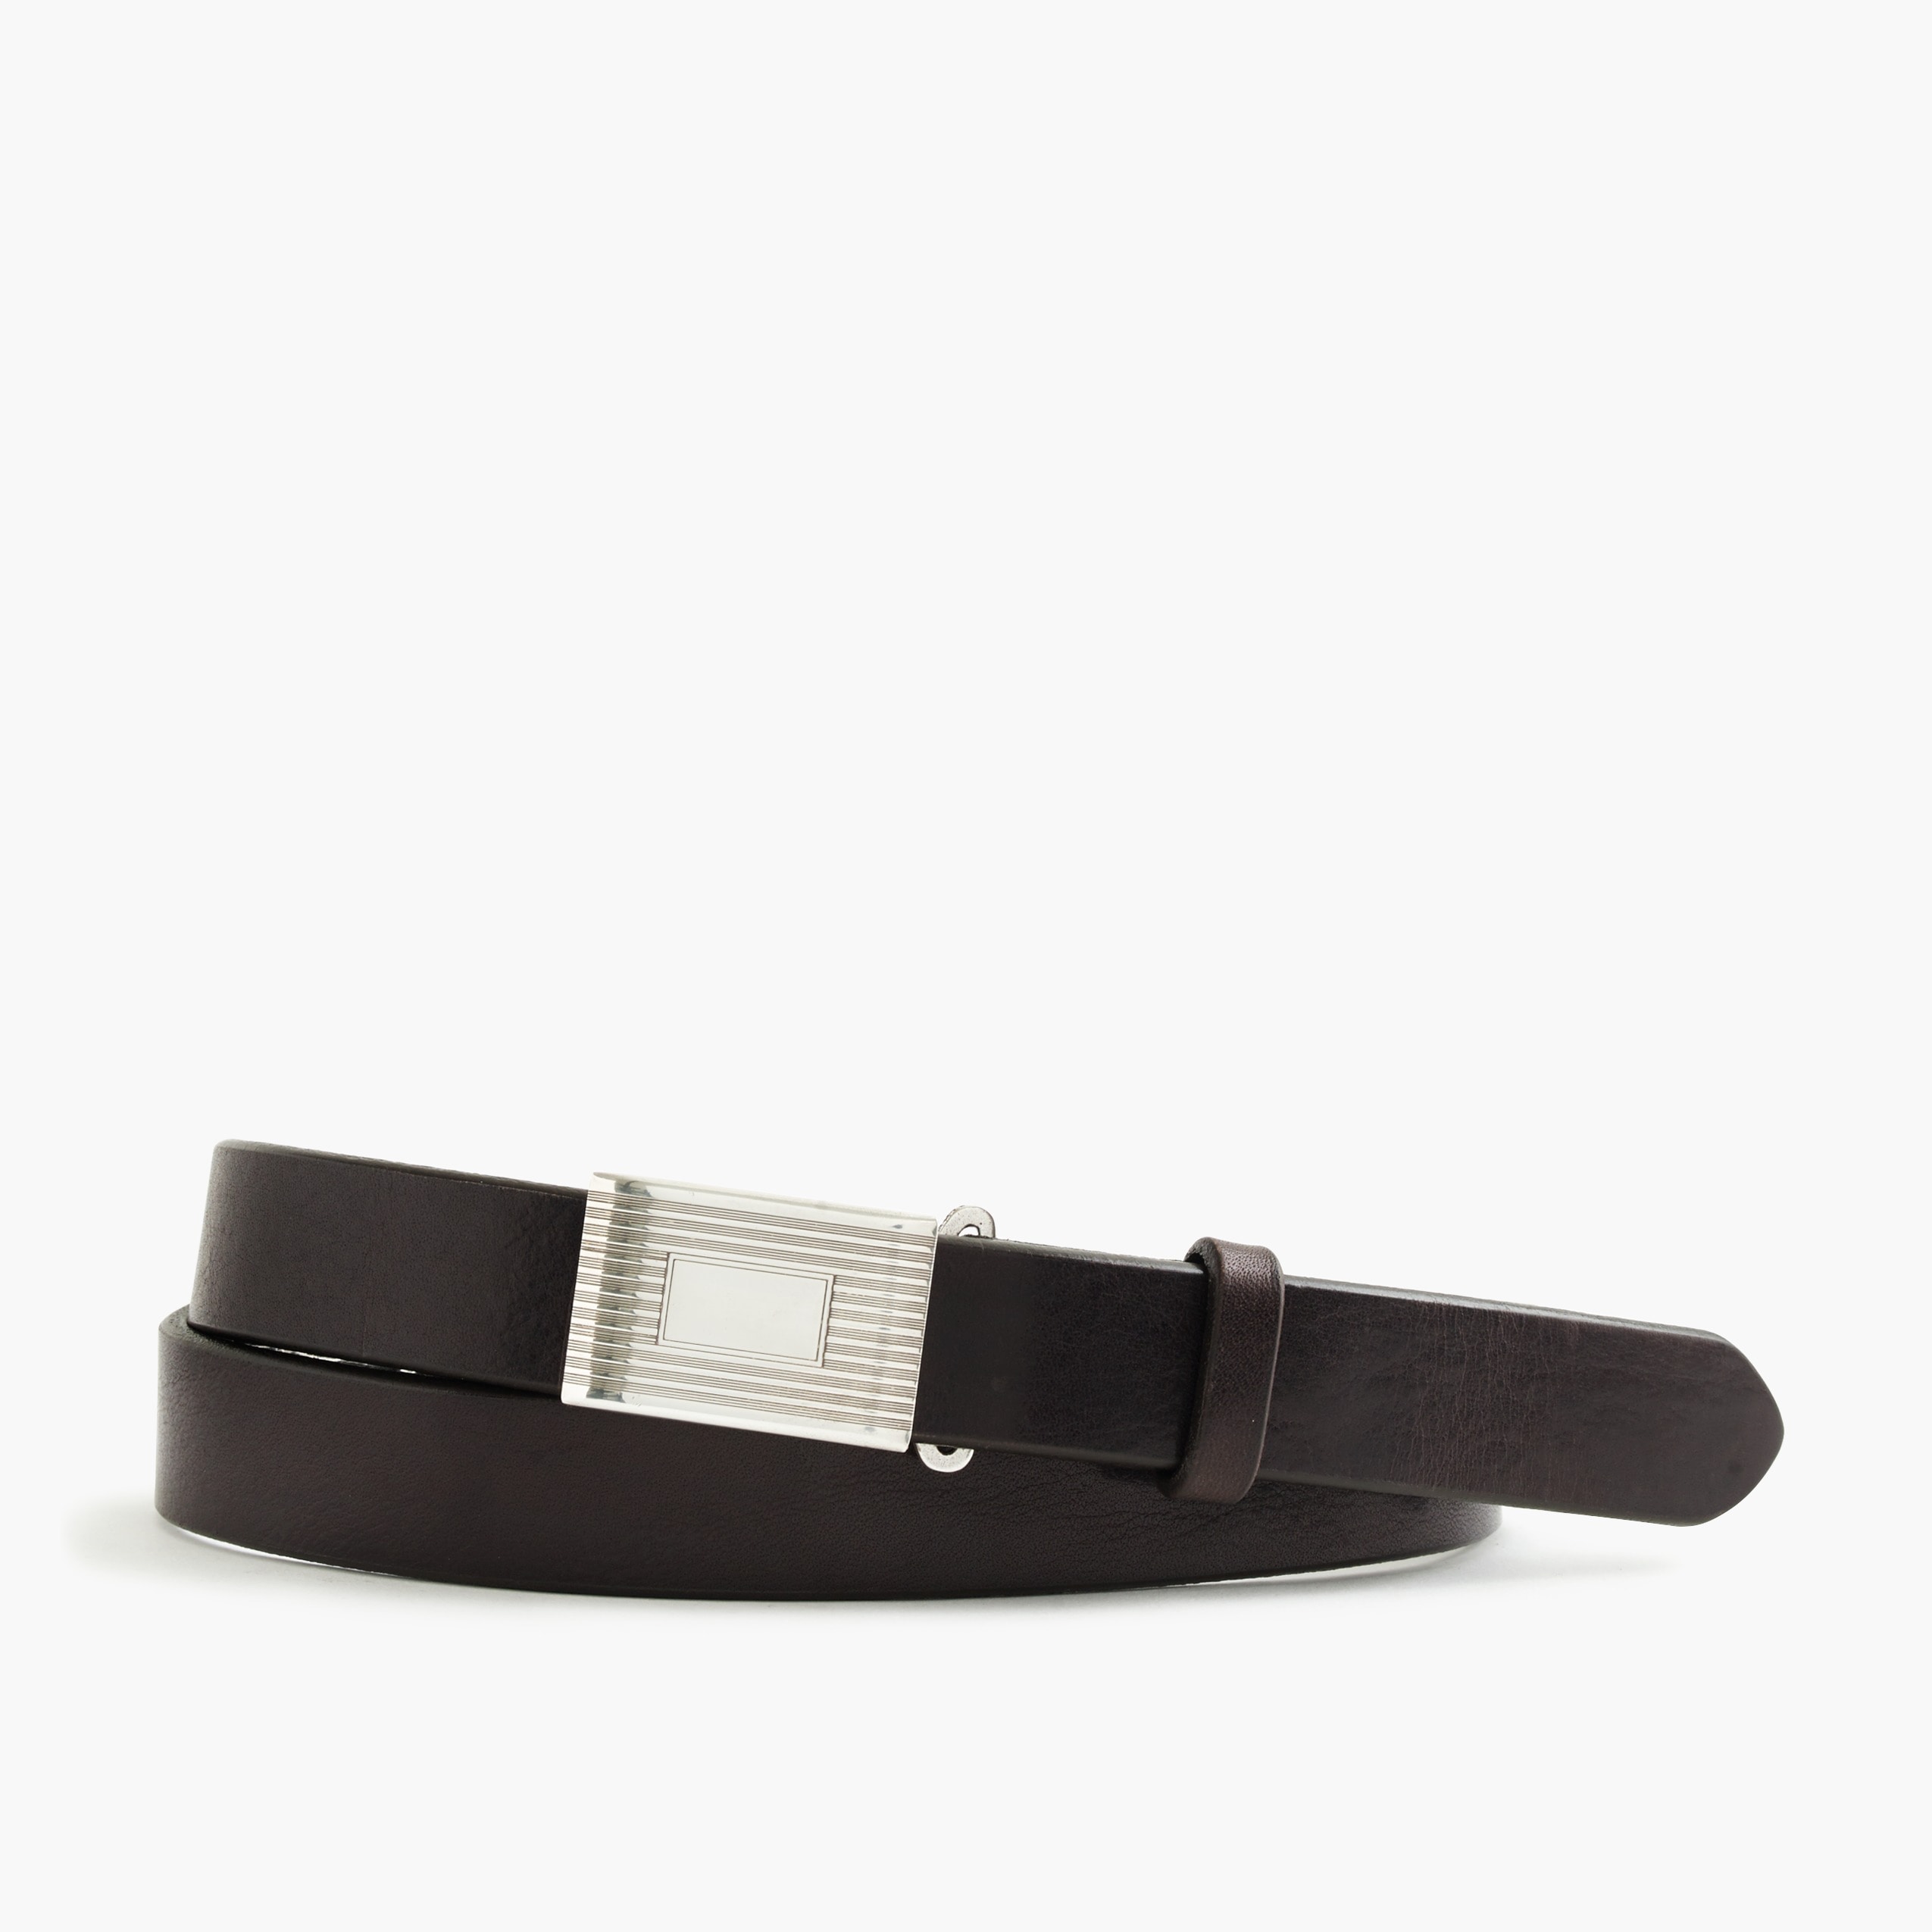 J.Crew: Classic Leather Belt With Removable Silver-plated Buckle For Men